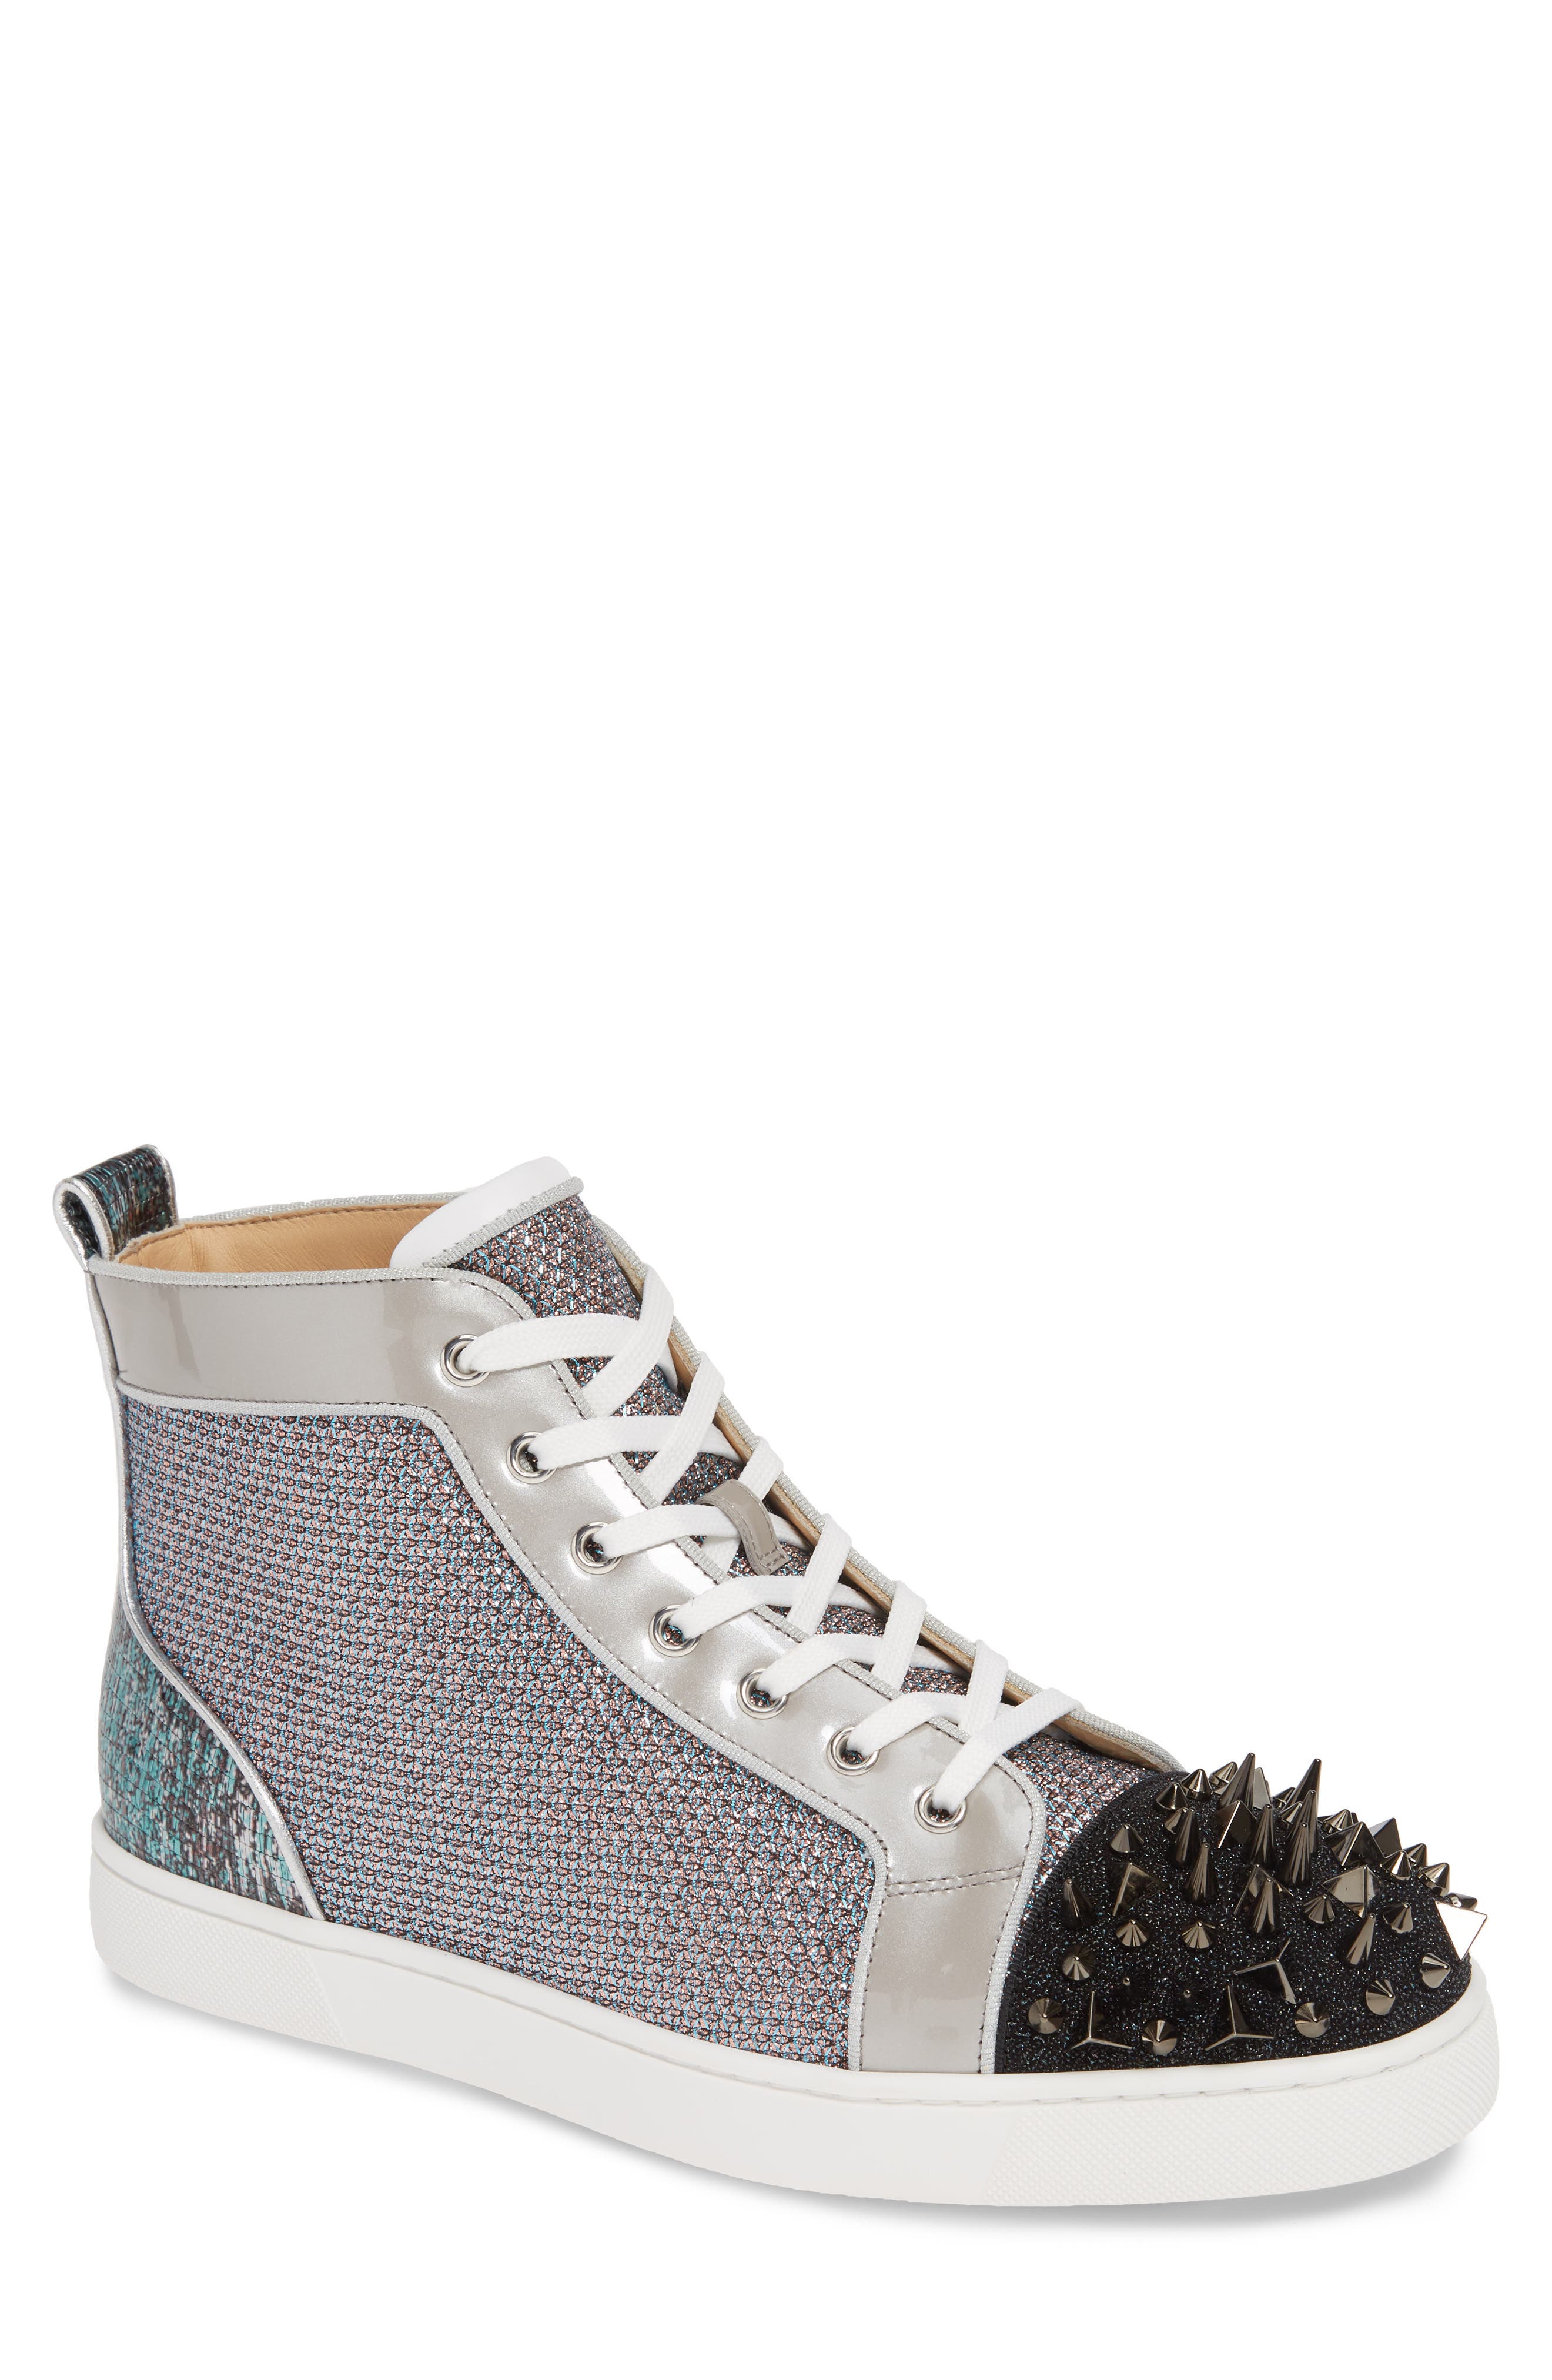 louboutin trainers high top